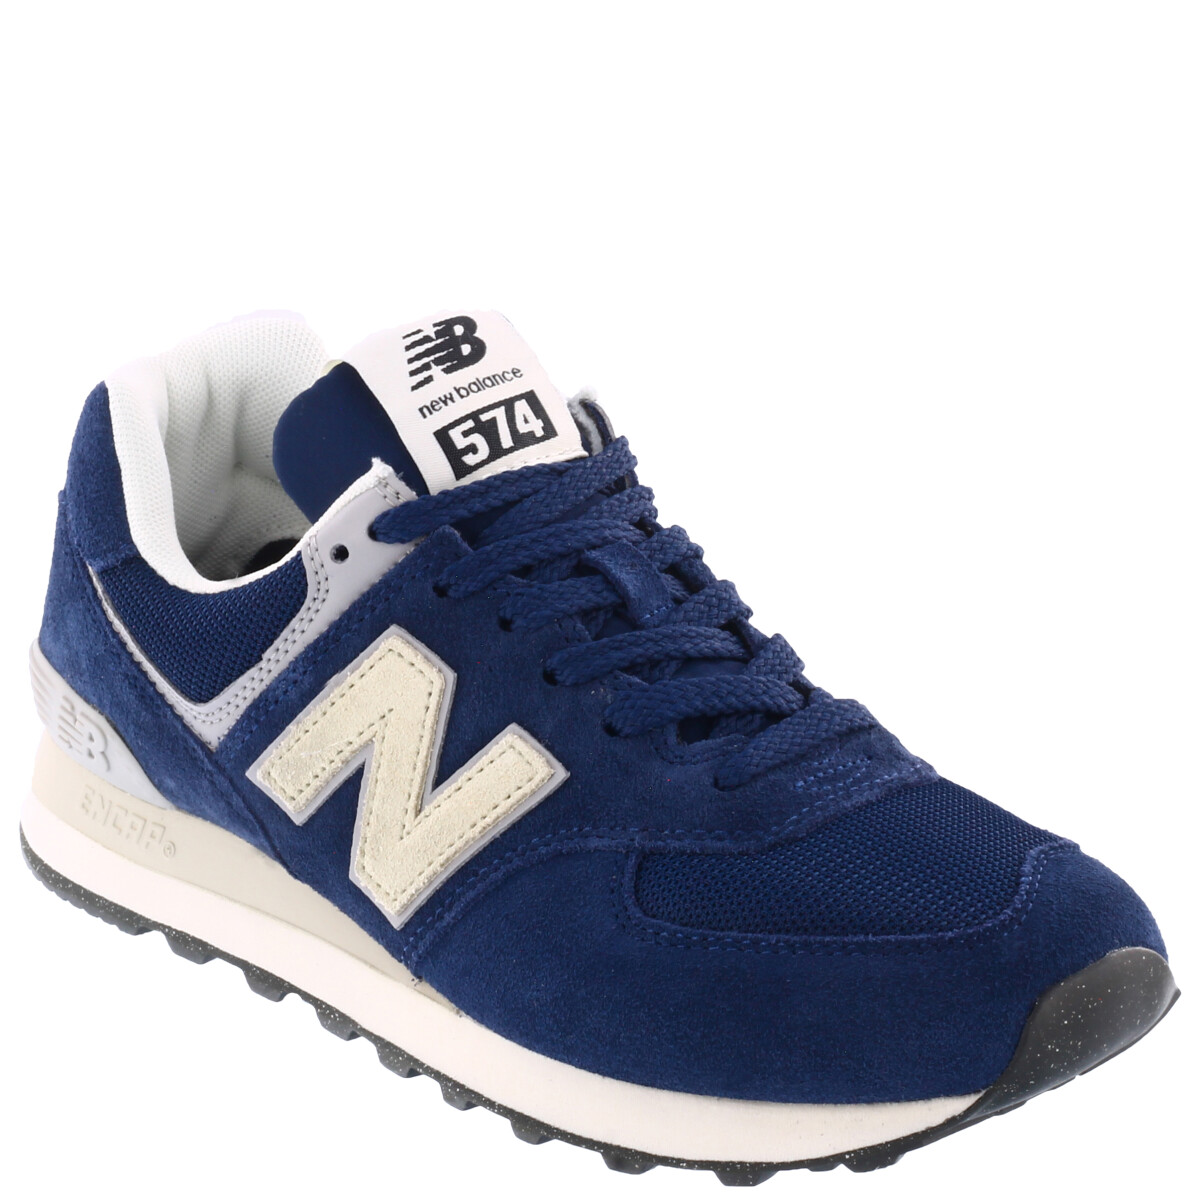 Classic Traditionnels New Balance - Navy/Beige 